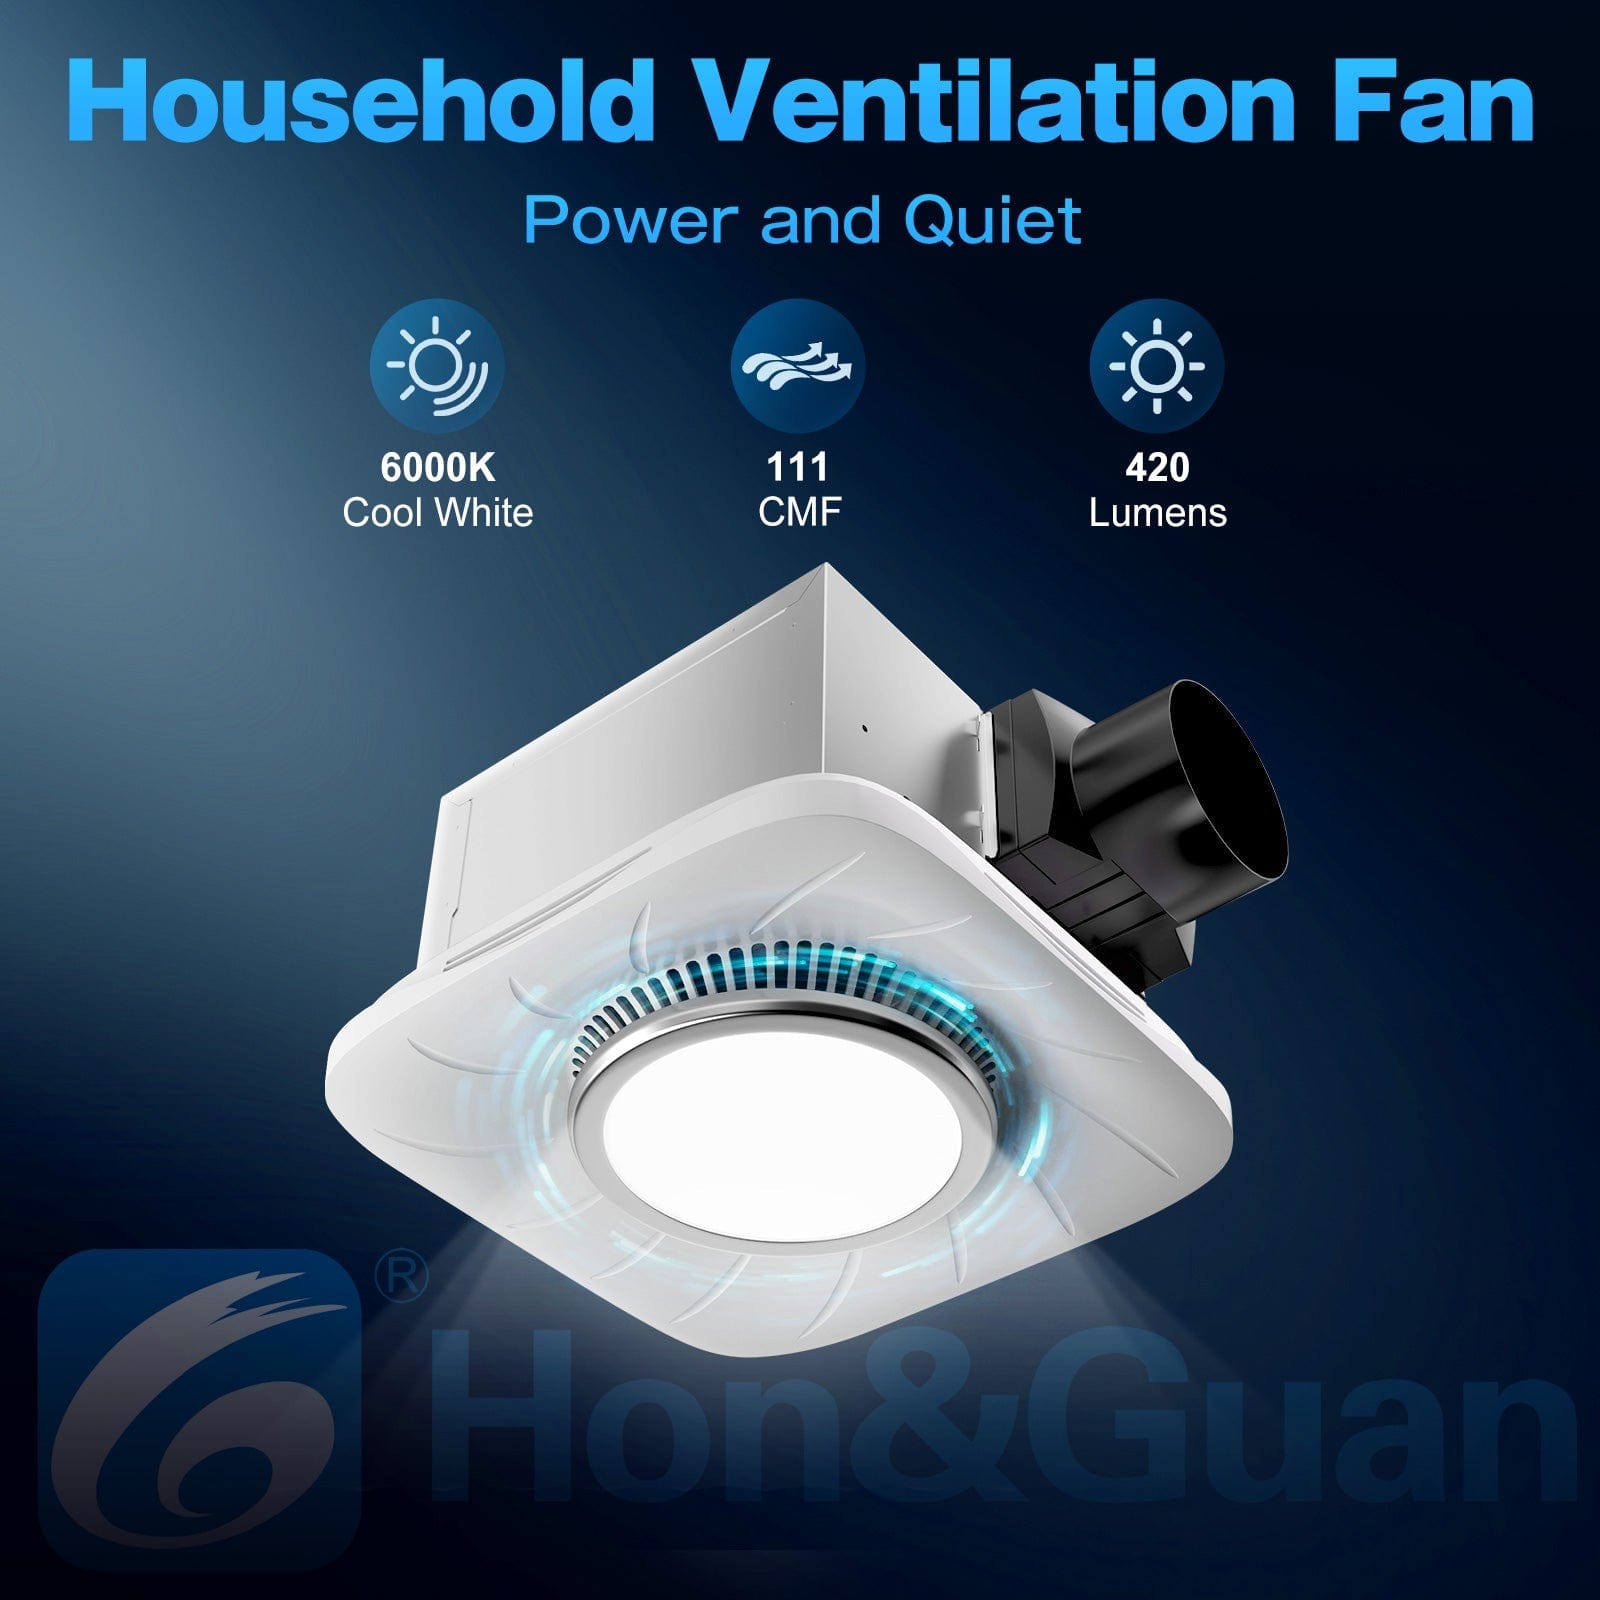 Bathroom Exhaust Fan with Light, 111 CFM Ventilation Fan with 6000K Cool White LED Light for Home, 45 Watts & 1.5 Sones